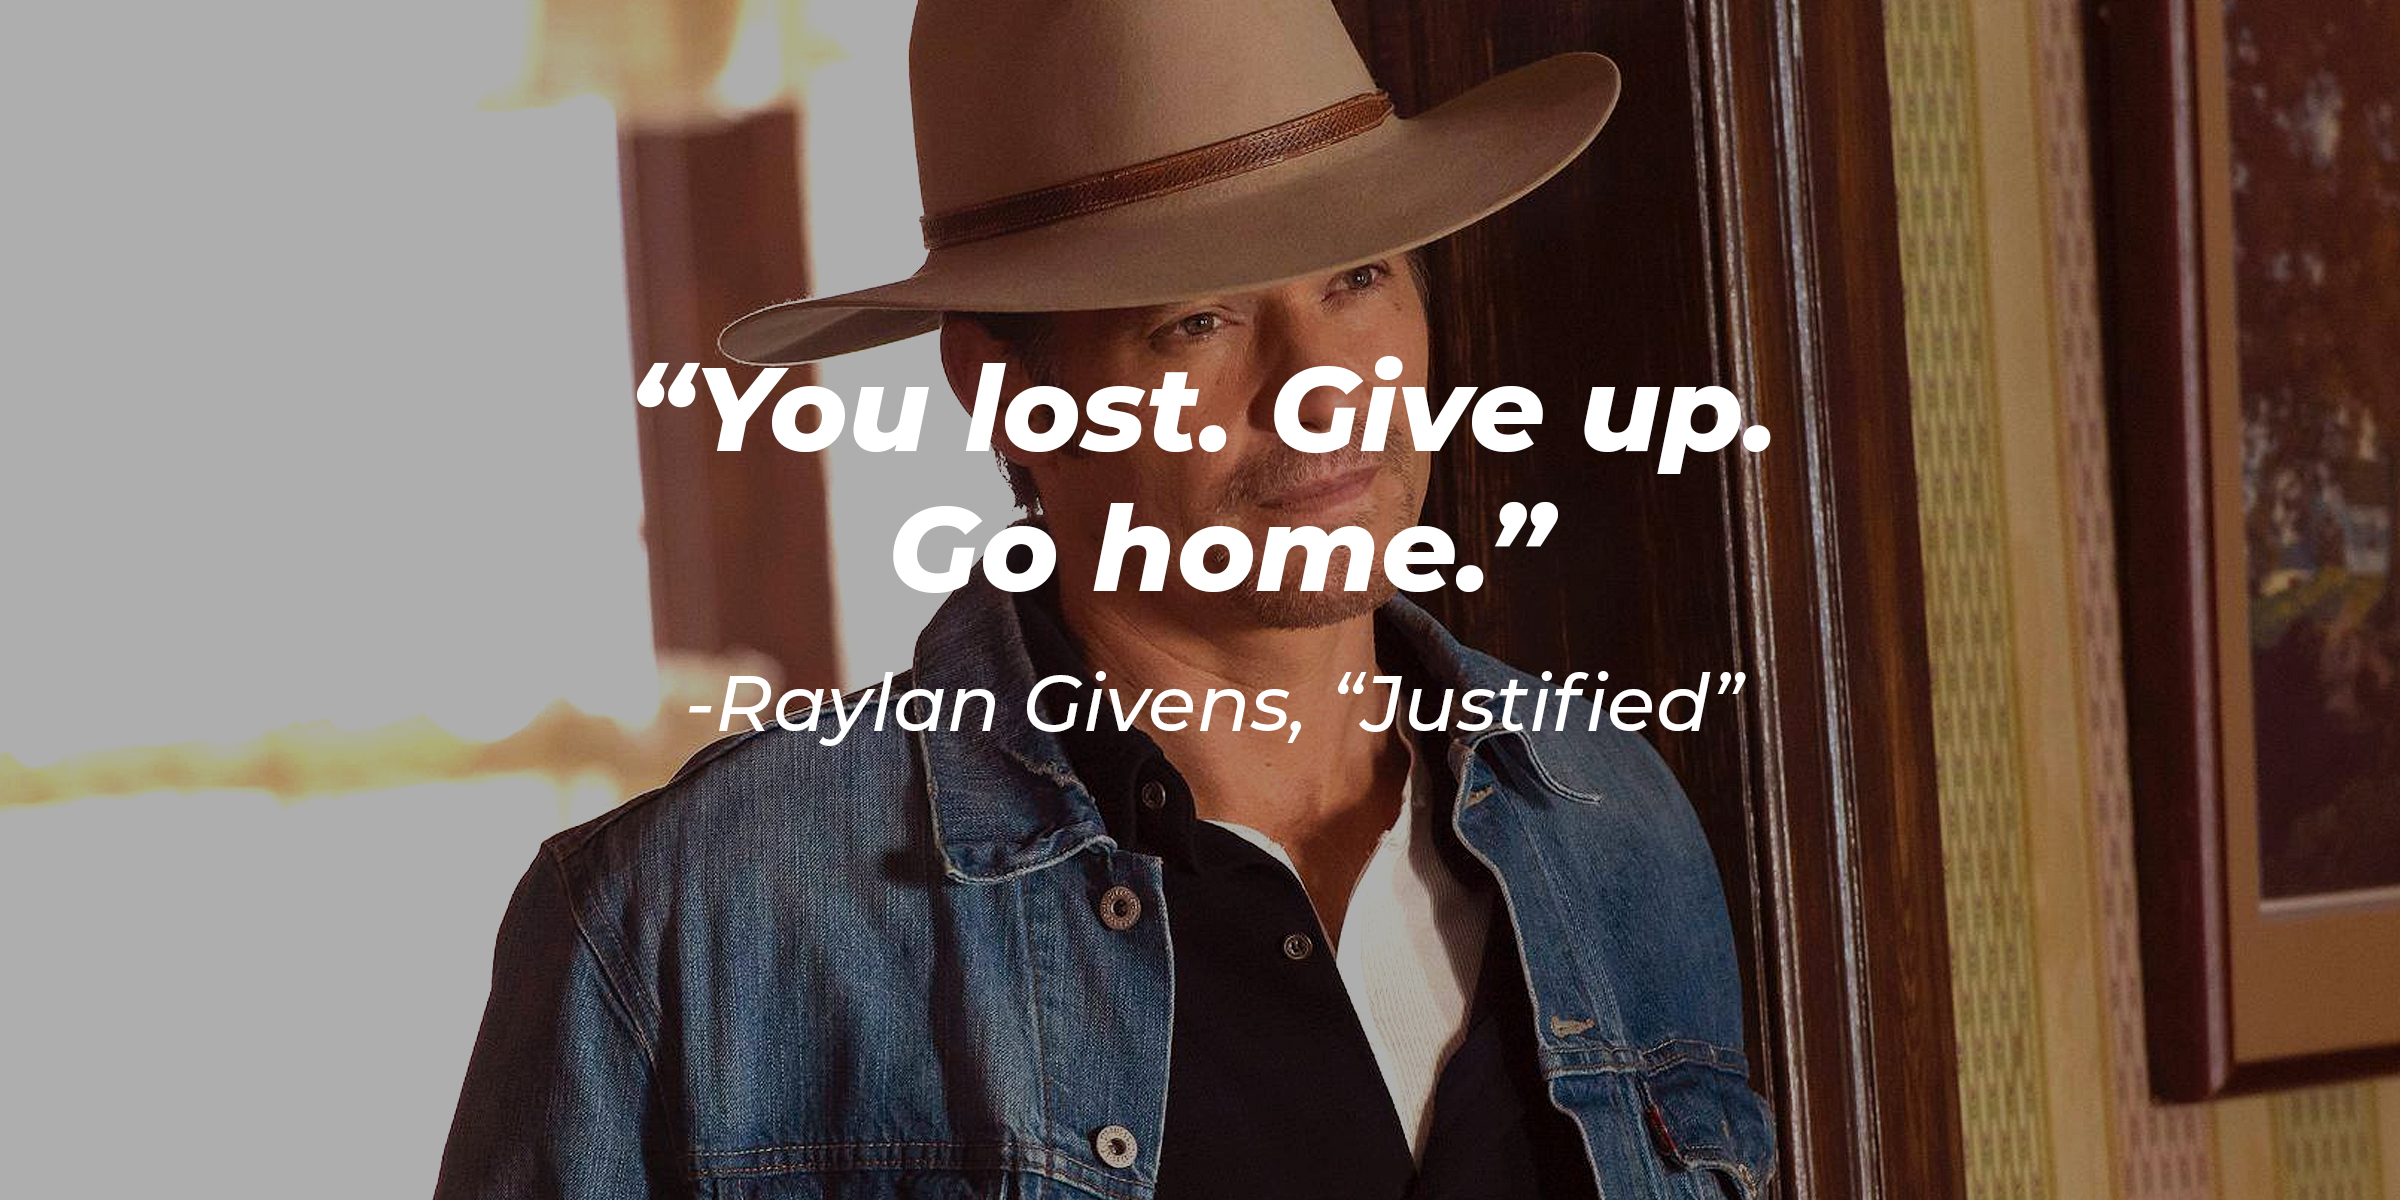 Raylan Givens' image with the quote from "Justified": "You lost. Give up. Go home."